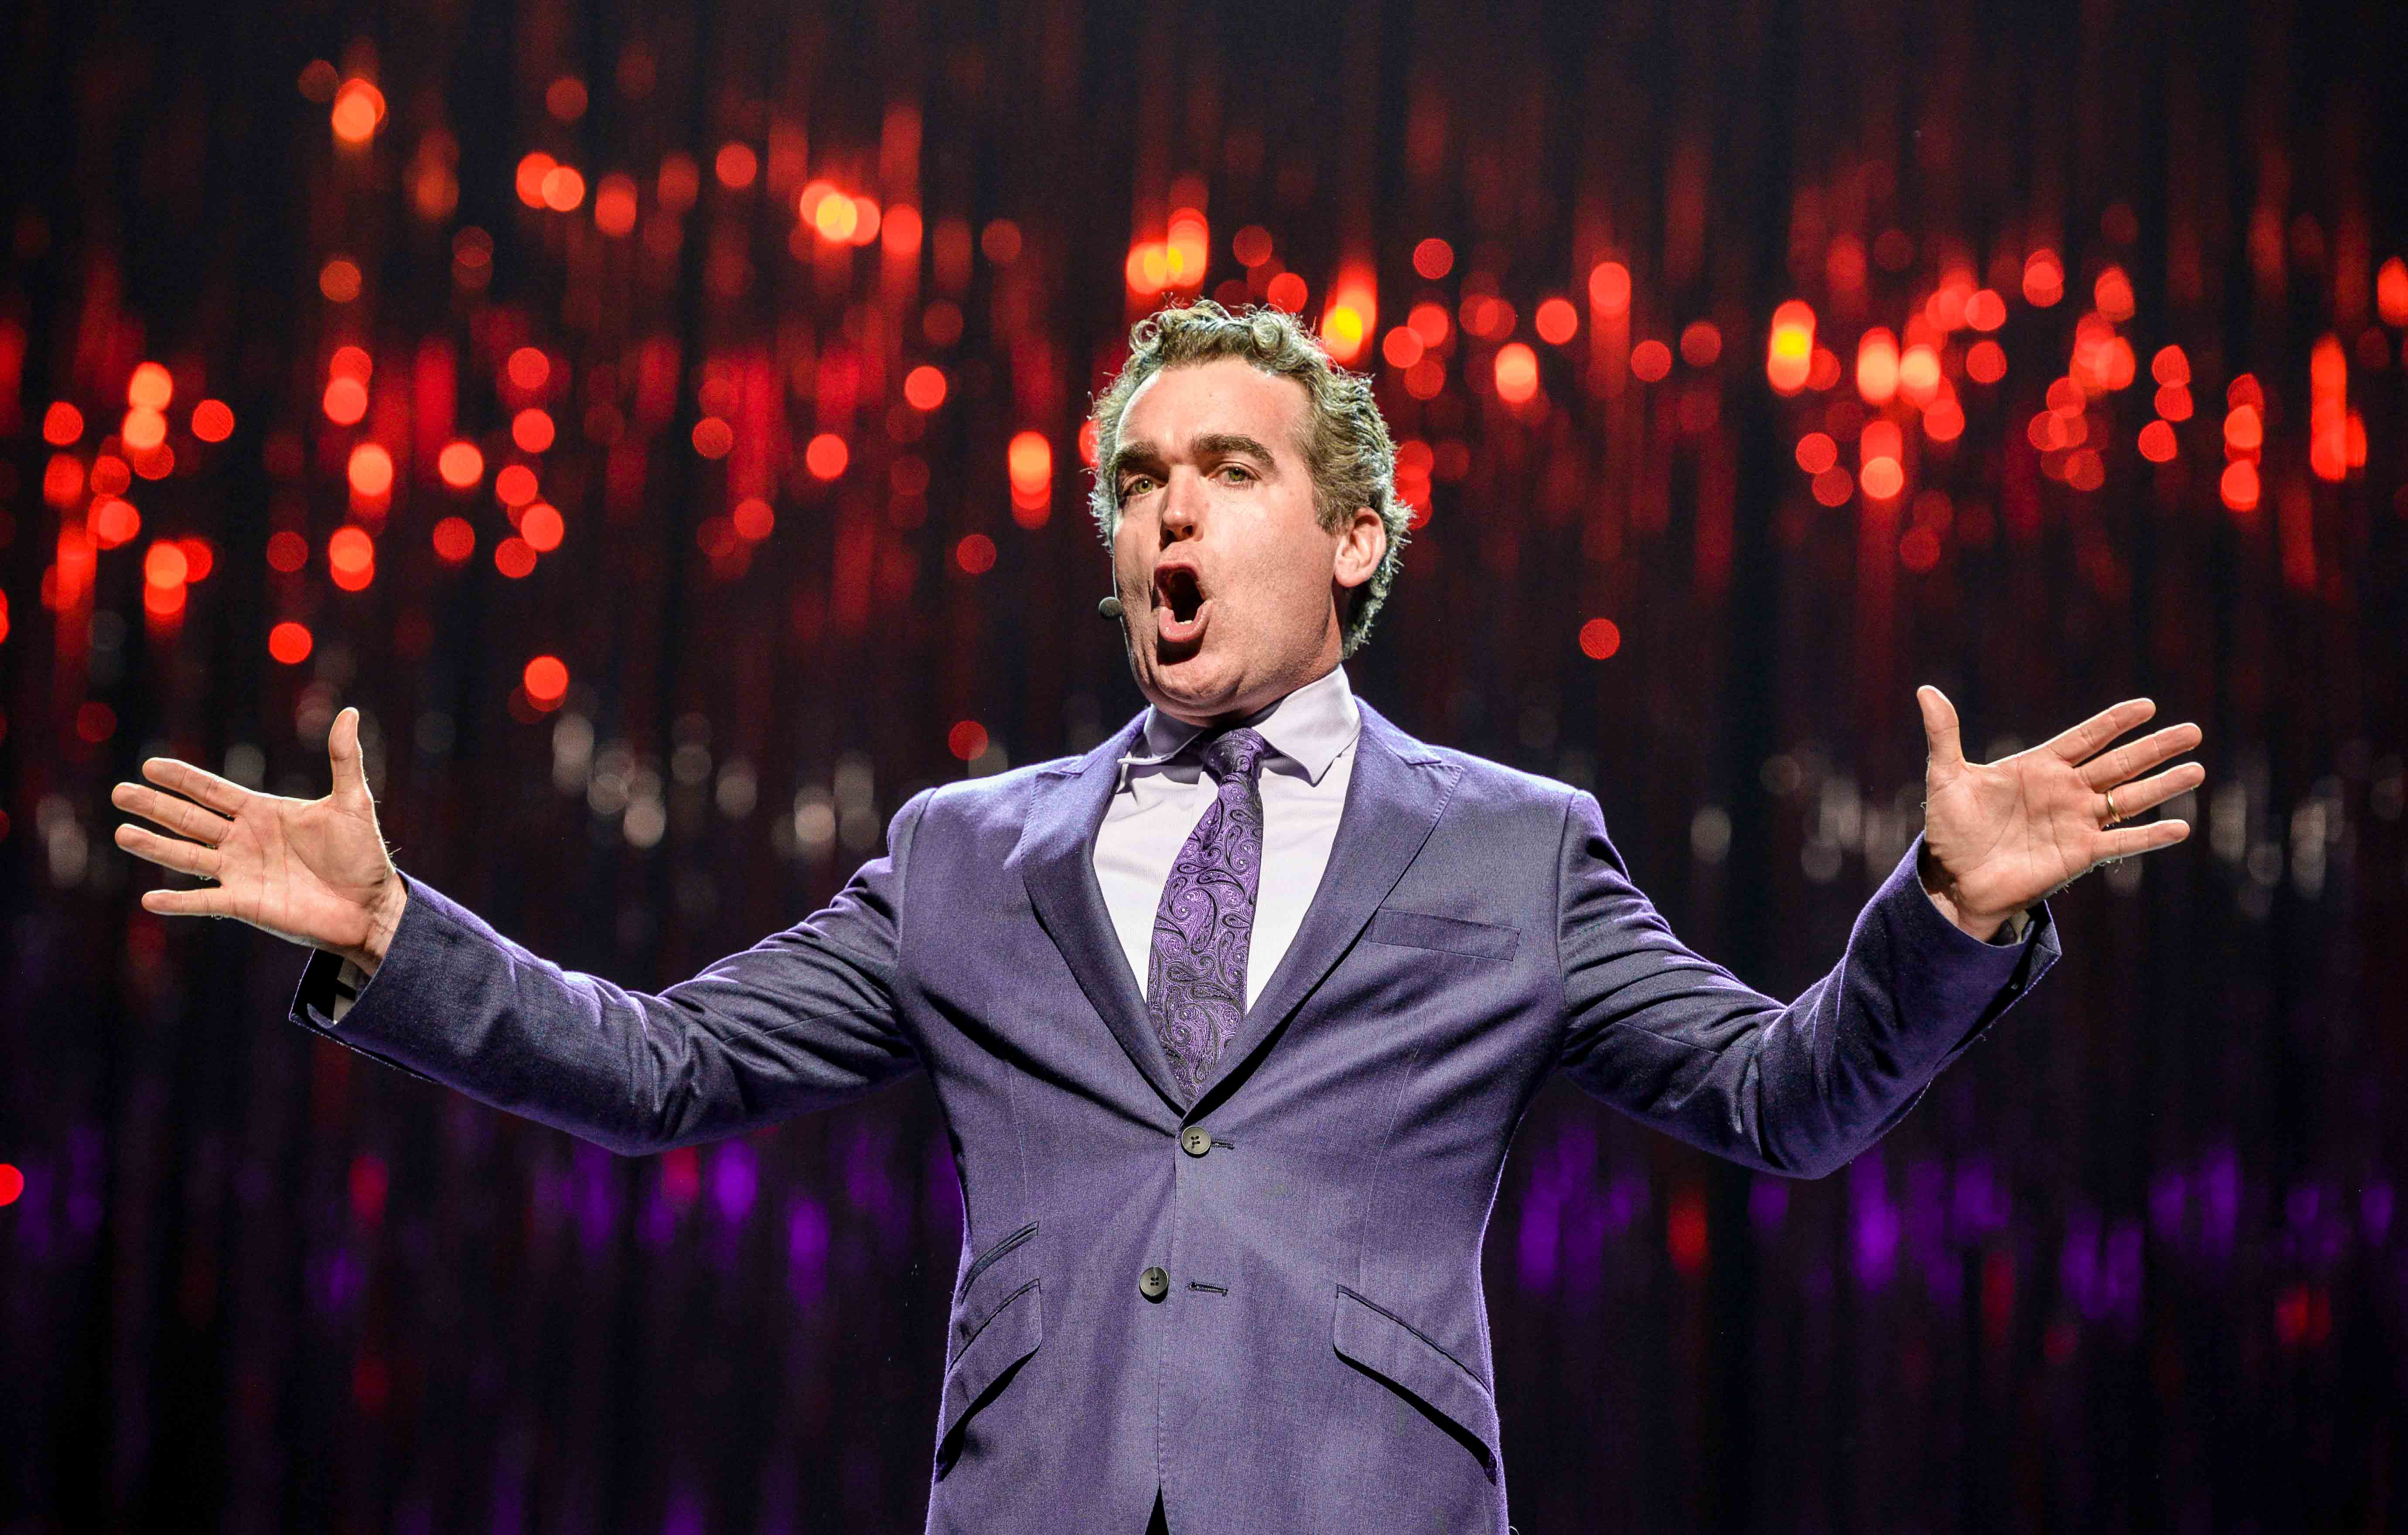 Brian D'Arcy James singing with arms outstretched